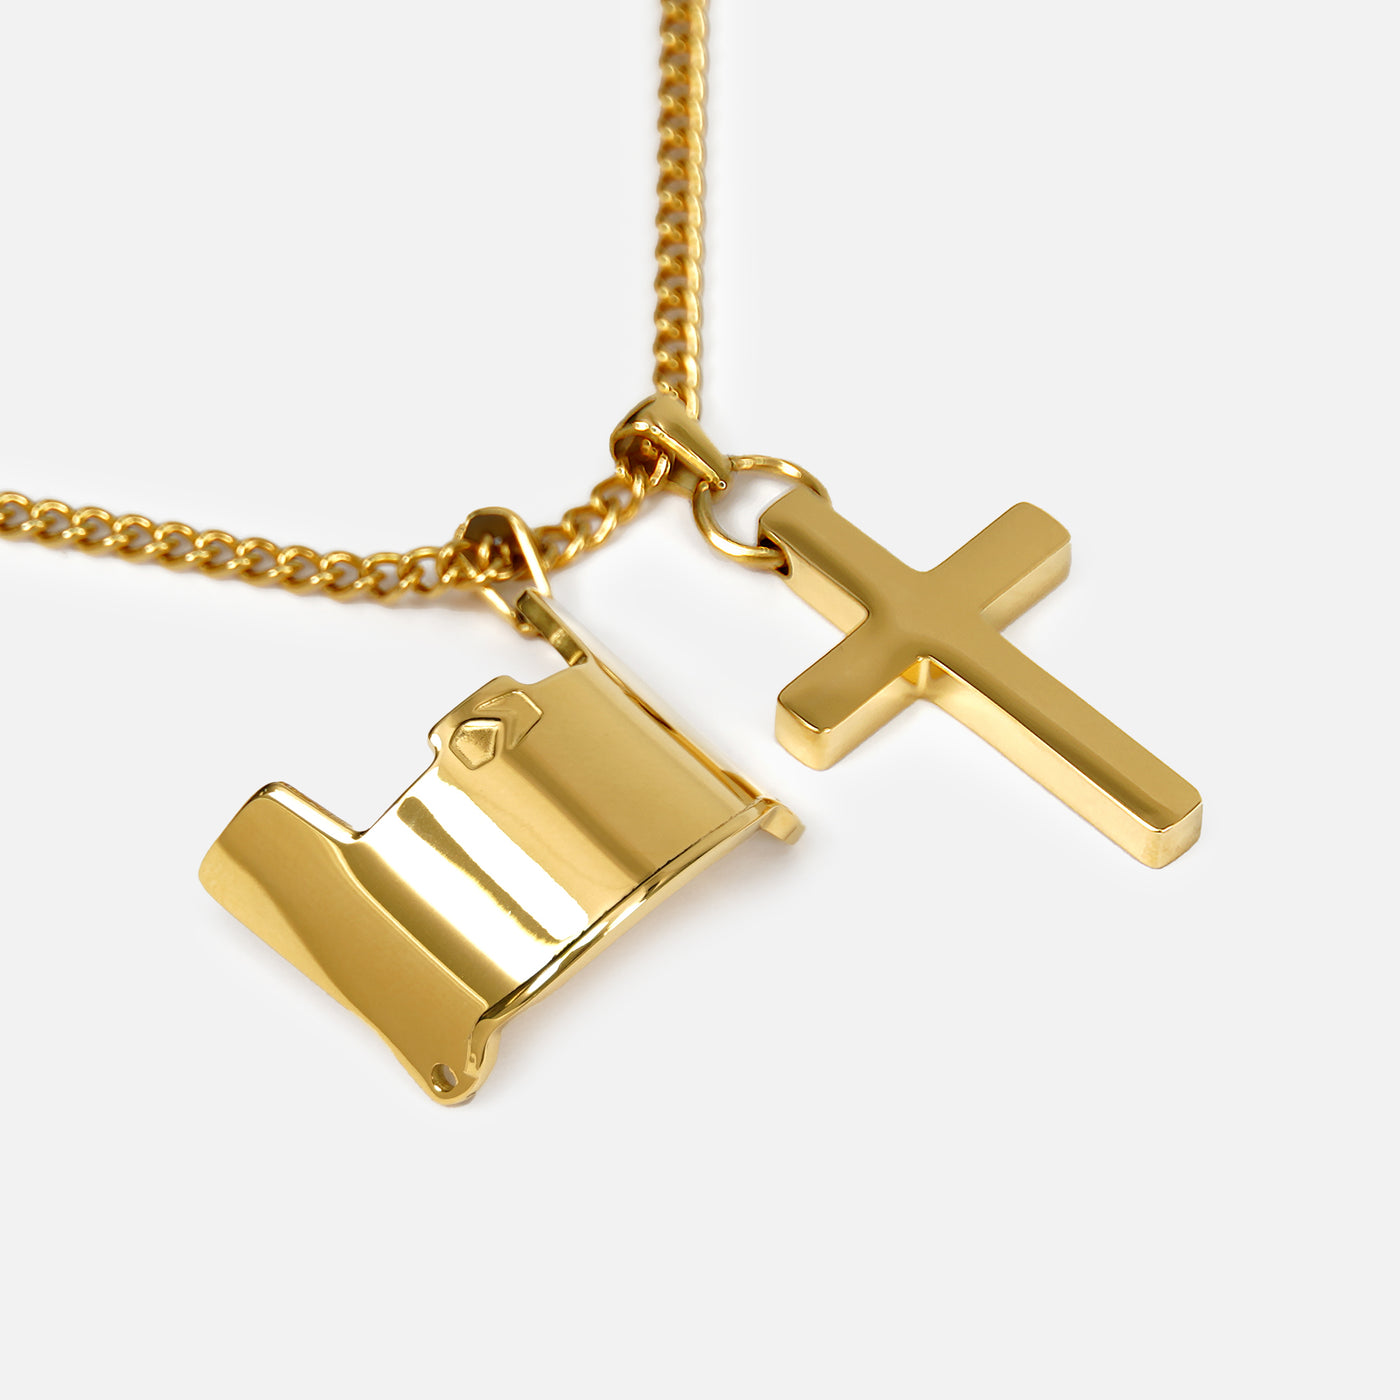 Visor & Cross Pendant with Chain Necklace - Gold Plated Stainless Steel